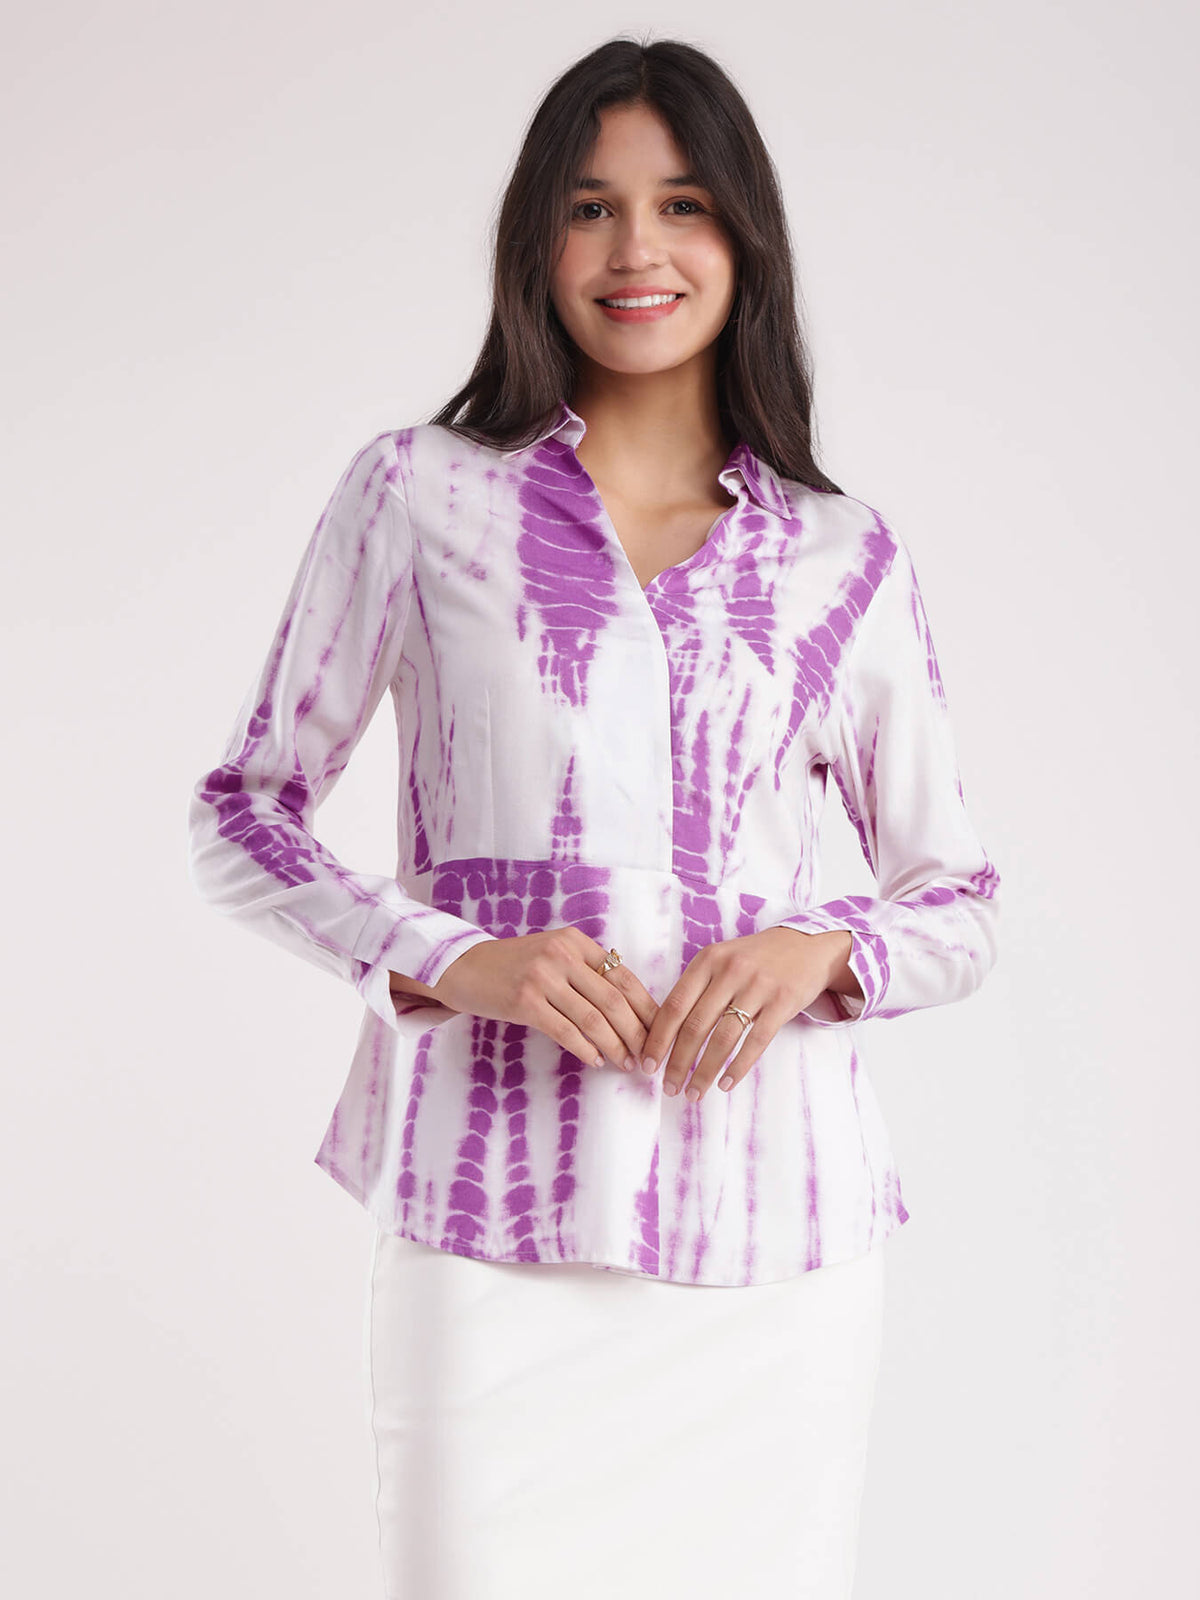 Collared V Neck Top - White And Lavender